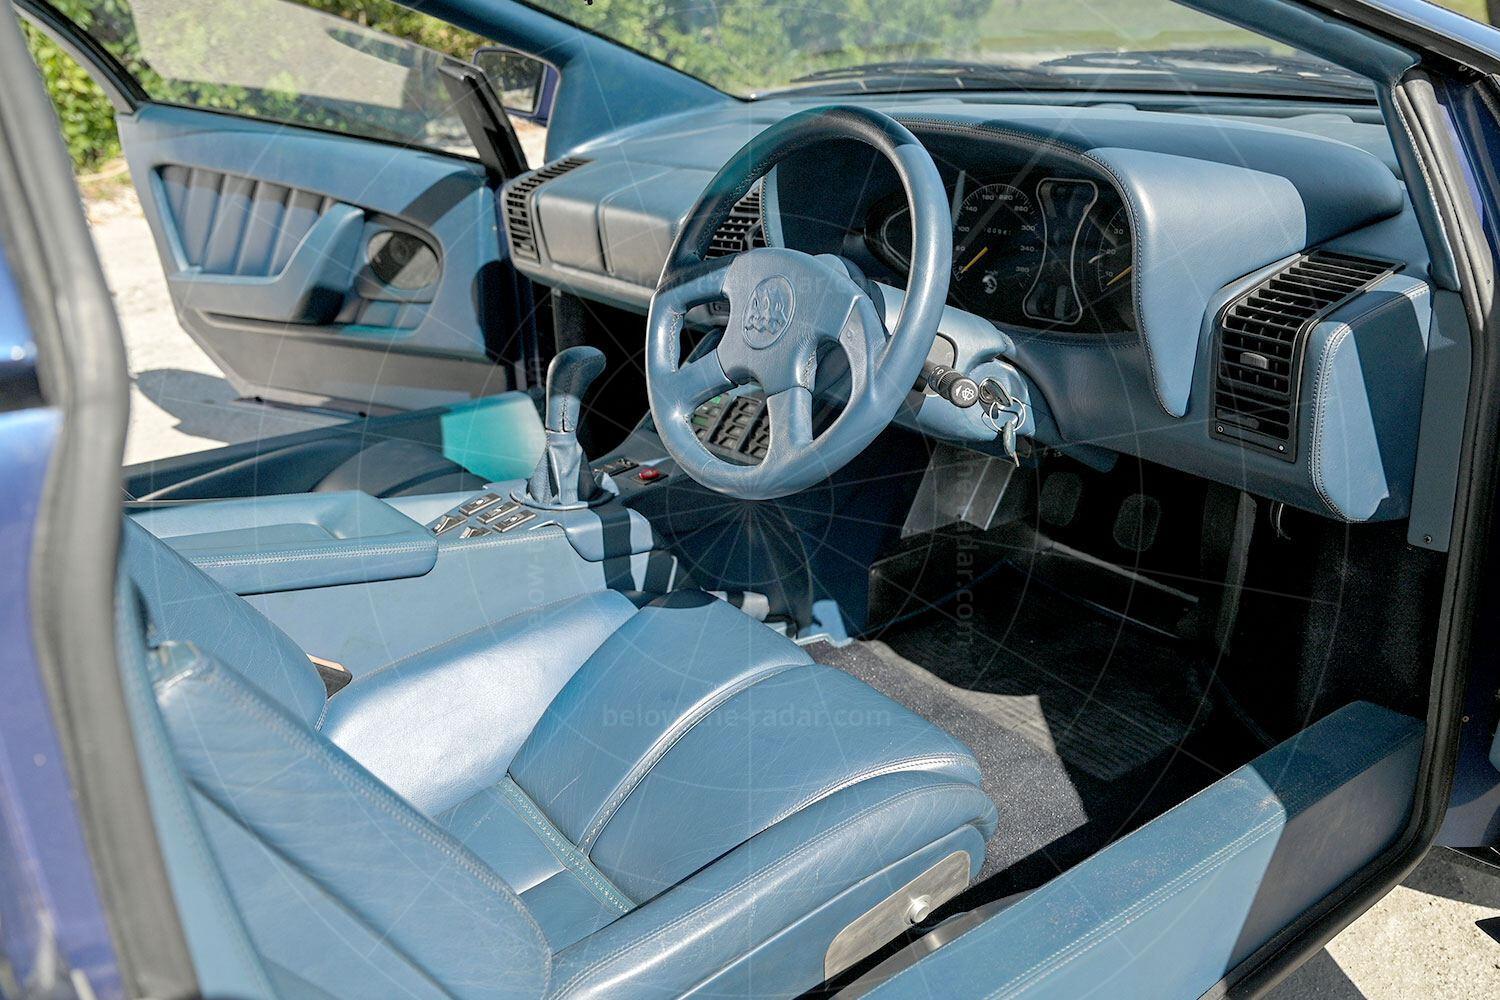 The Cizeta V16T's interior Pic: RM Sotheby's | The Cizeta V16T's interior